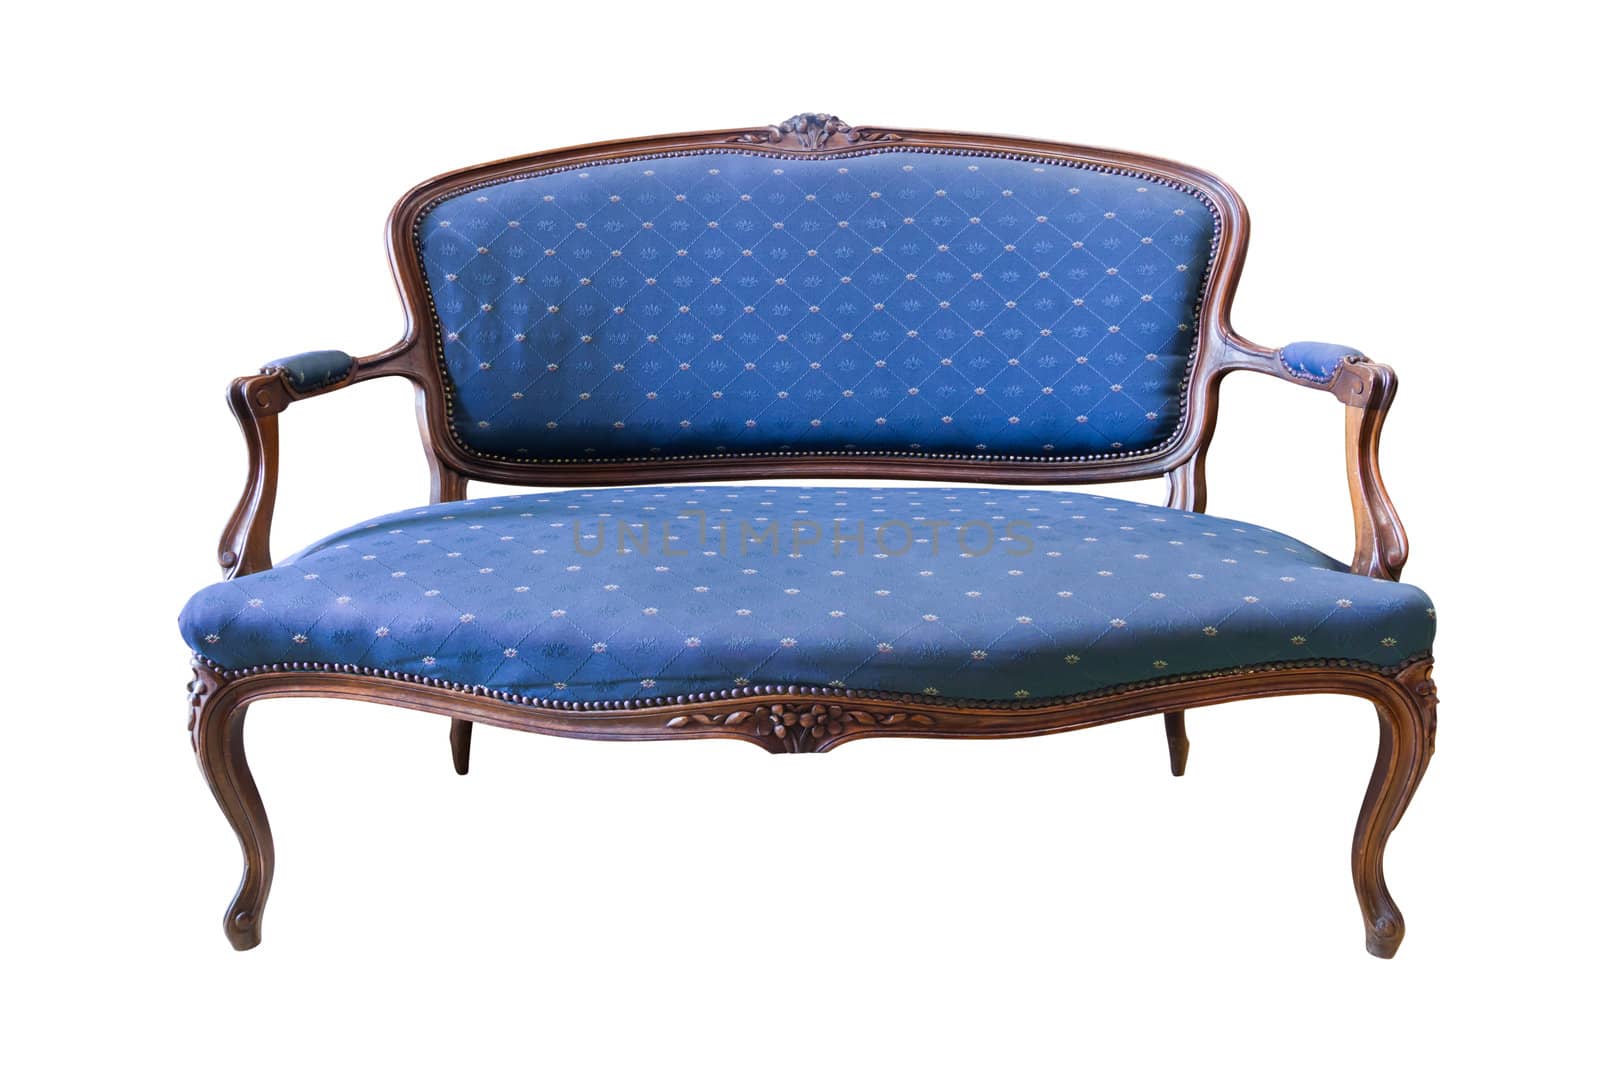 vintage blue luxury armchair isolated with clipping path by tungphoto